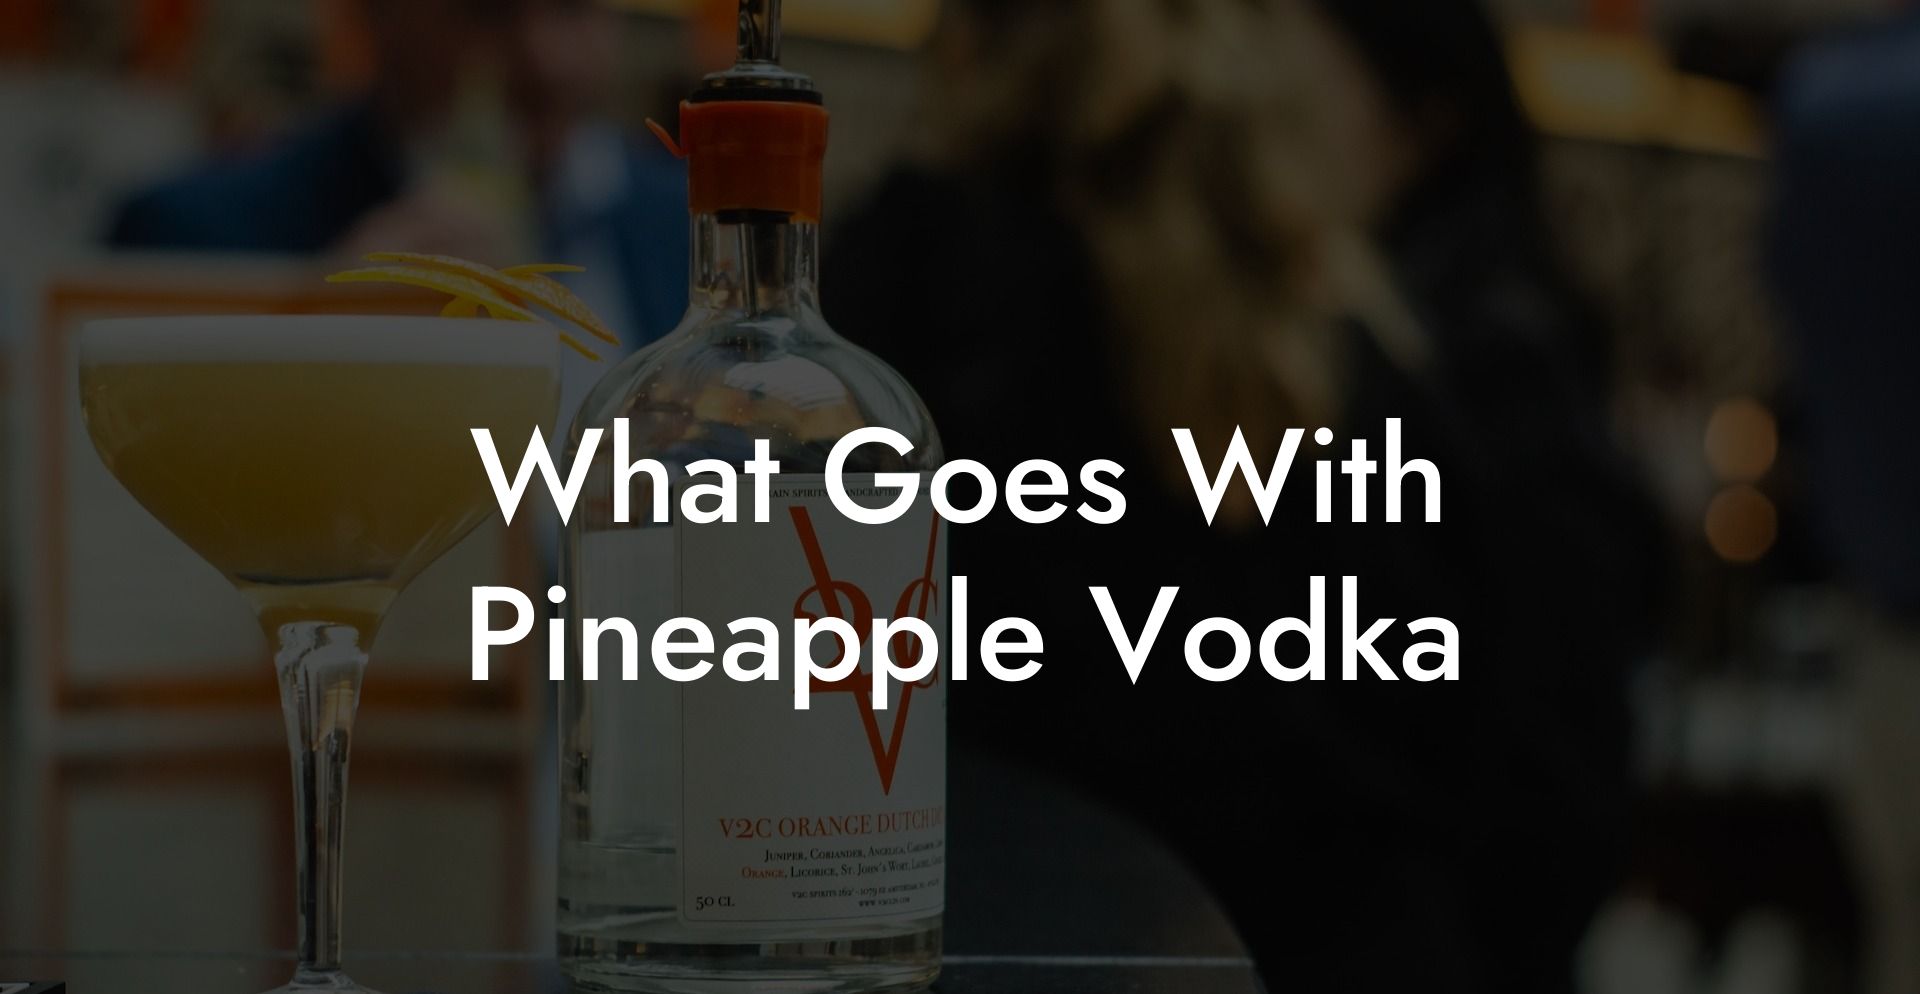 What Goes With Pineapple Vodka